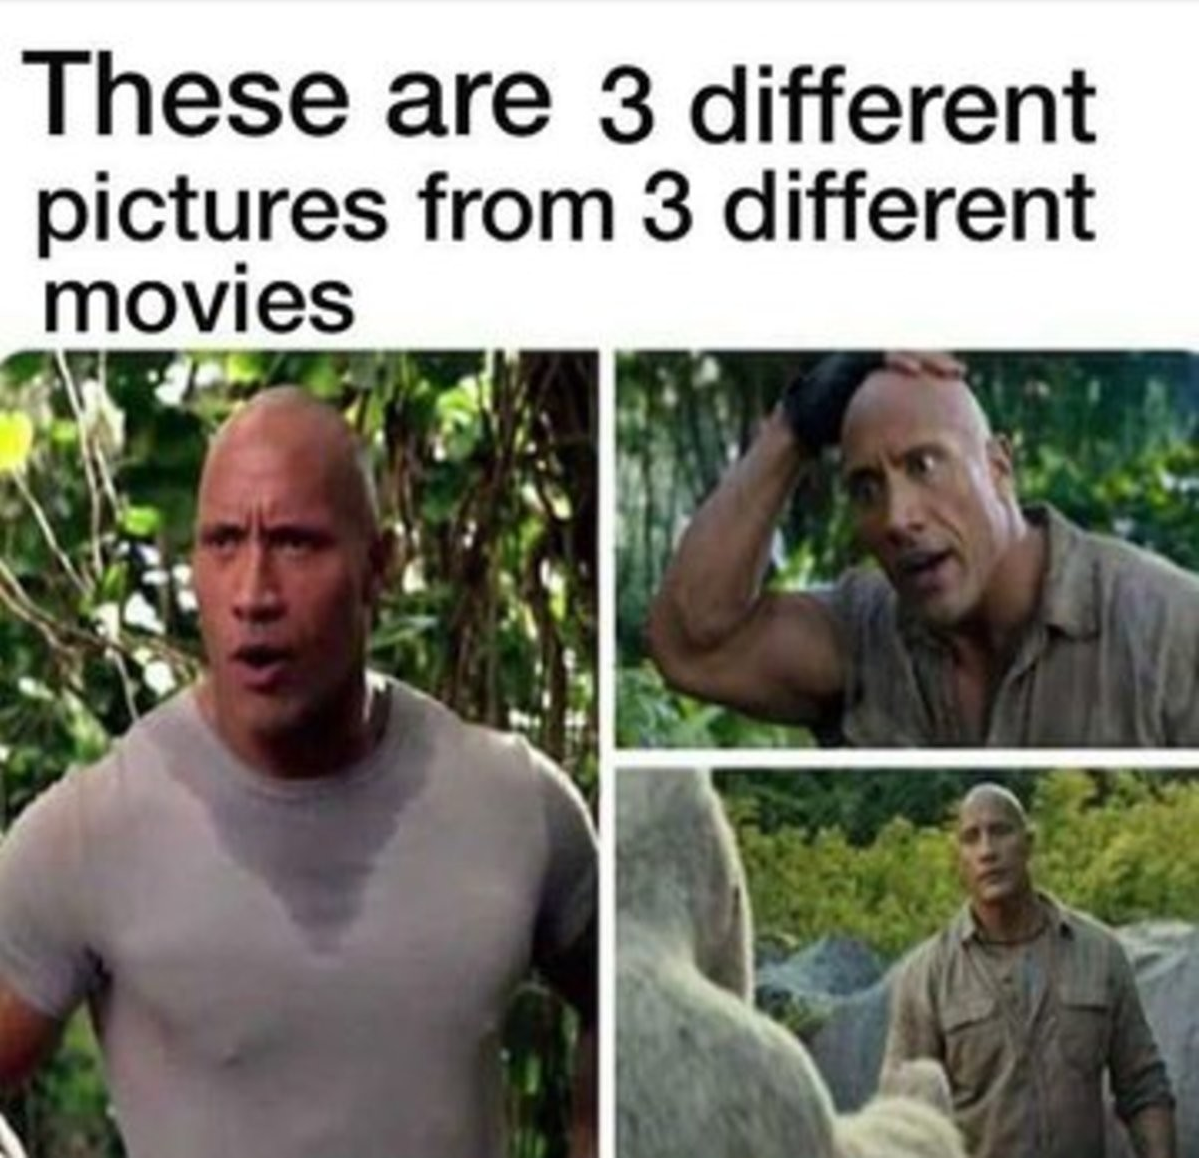 dwayne johnson different films - These are 3 different pictures from 3 different movies